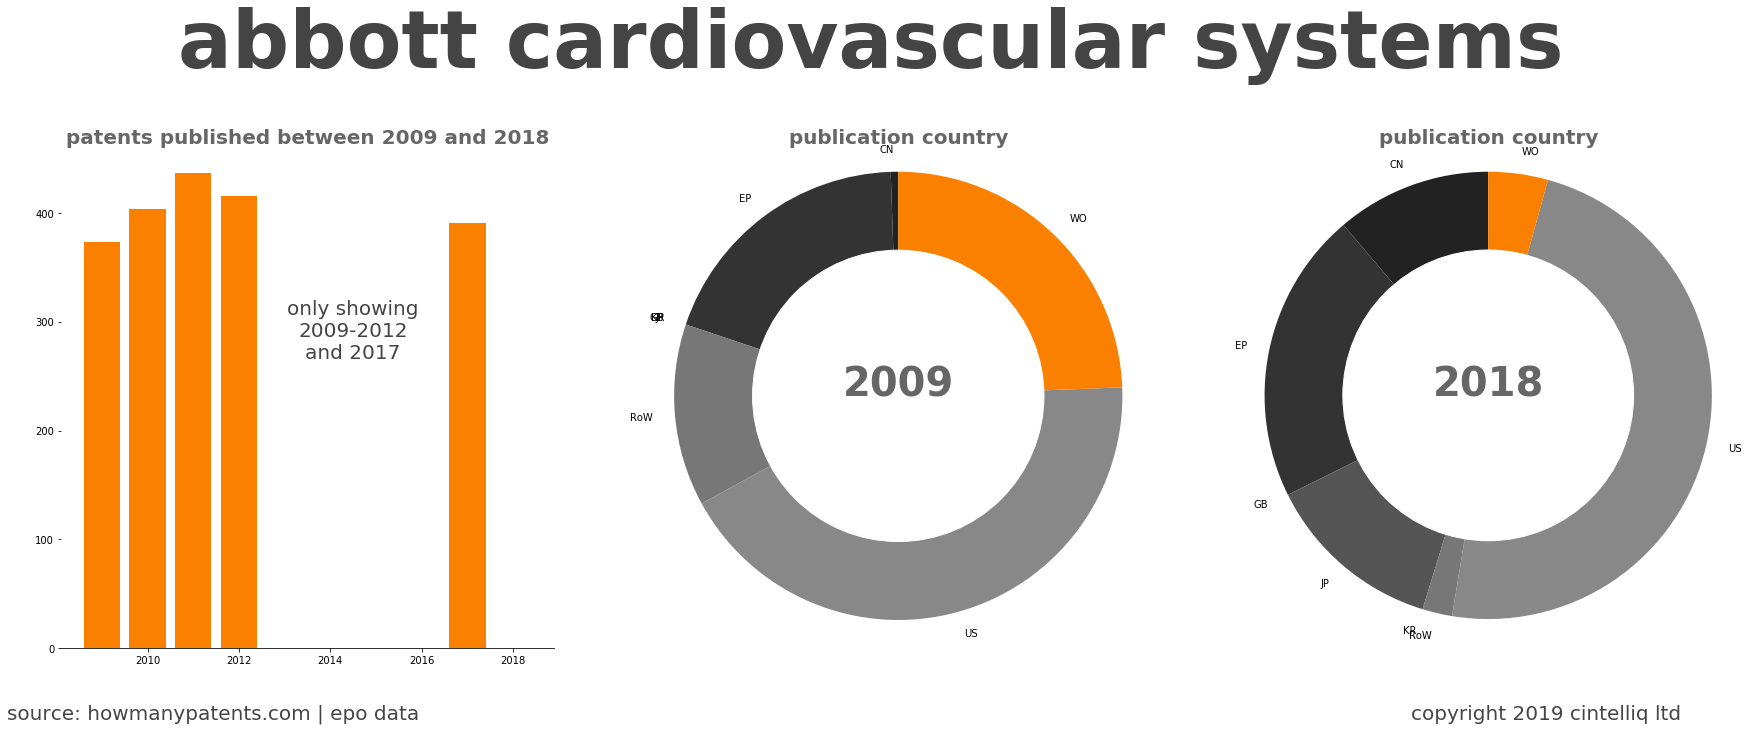 summary of patents for Abbott Cardiovascular Systems